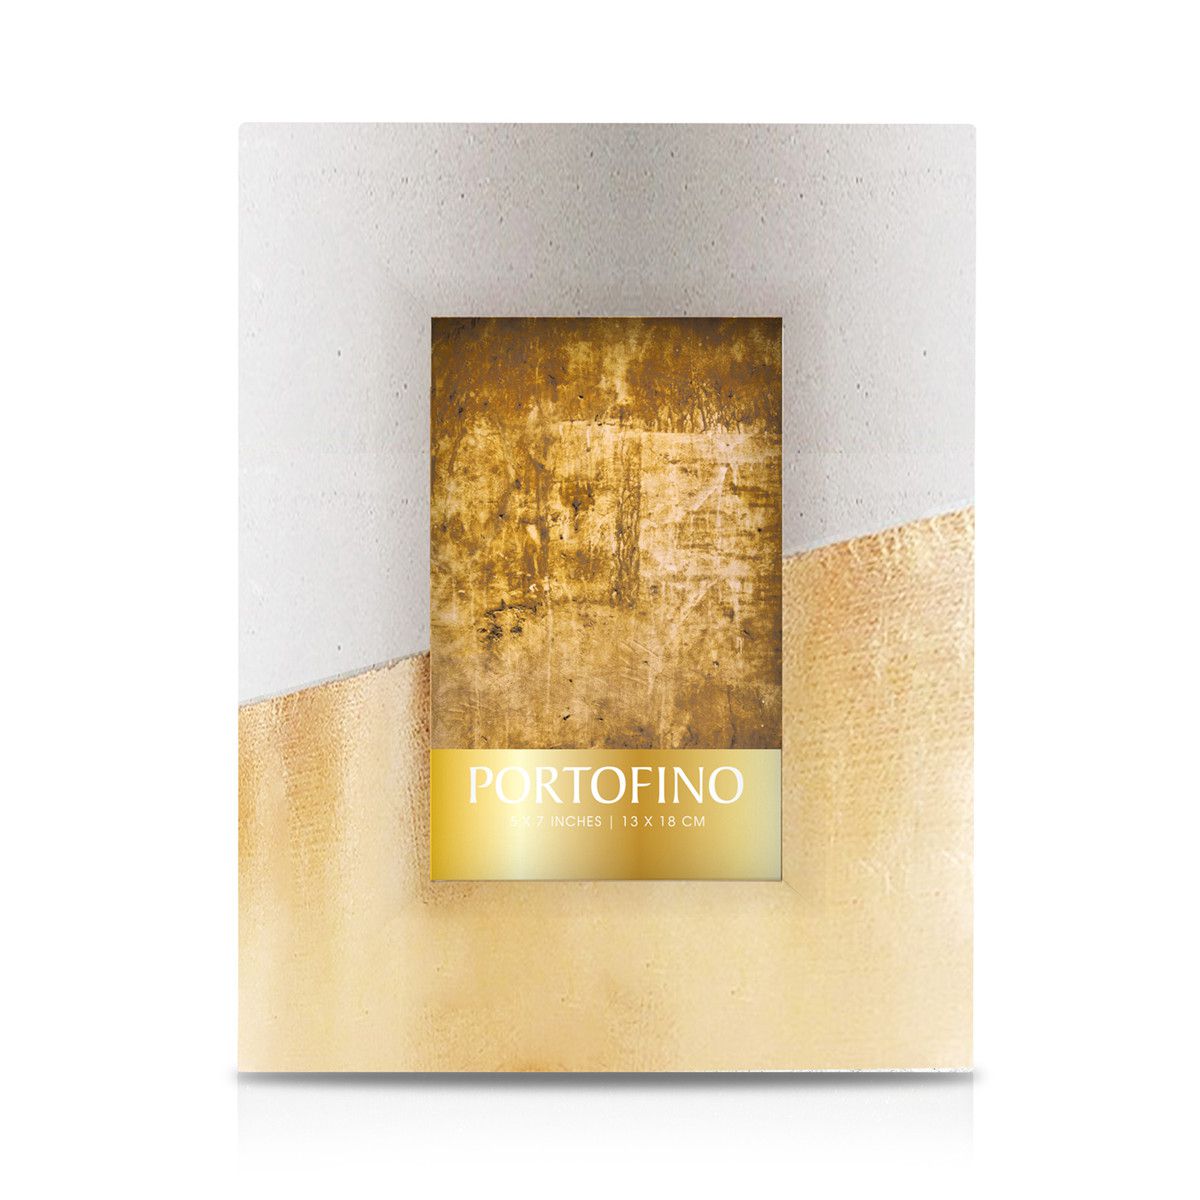 Argento SC Gold Concrete Block Picture Frame at Bloomingdale's, $28